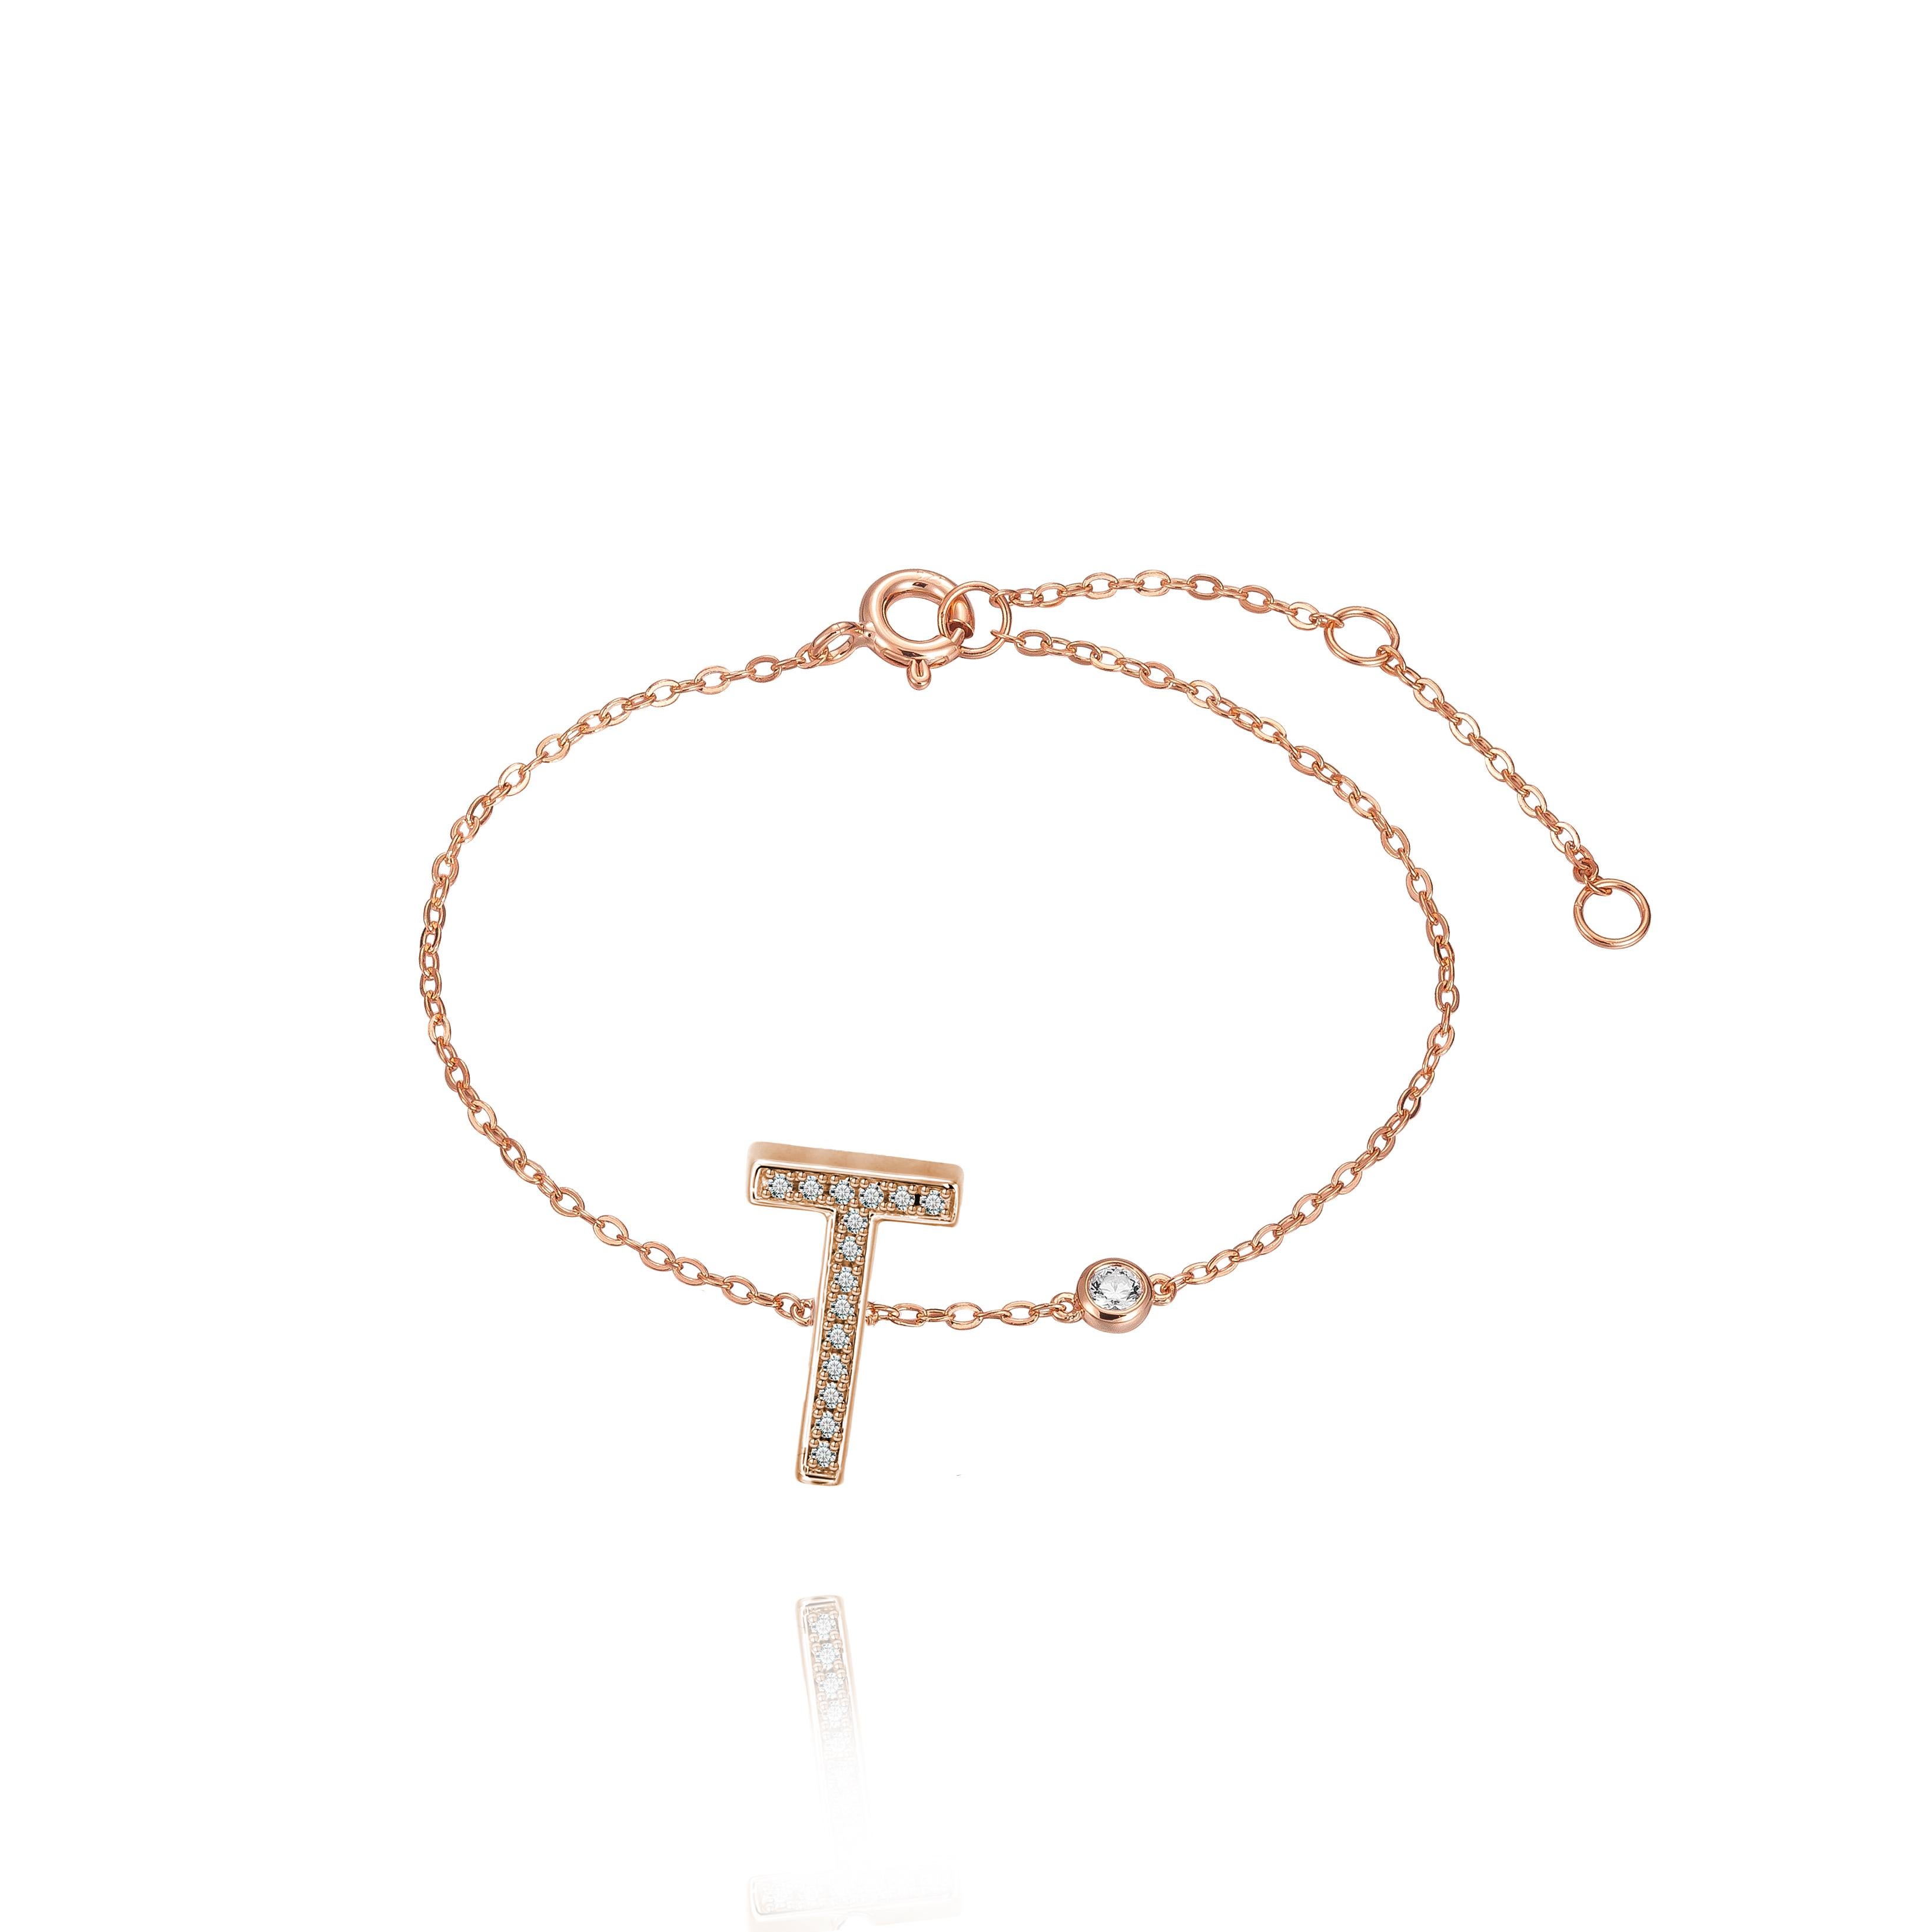 Nothing says YOU more than YOU. You are unique. You are bold.  You're not afraid to share who you are.  This initial bezel chain anklet is elegantly slimline while sharing a little bit about yourself with others. .925 sterling silver base also